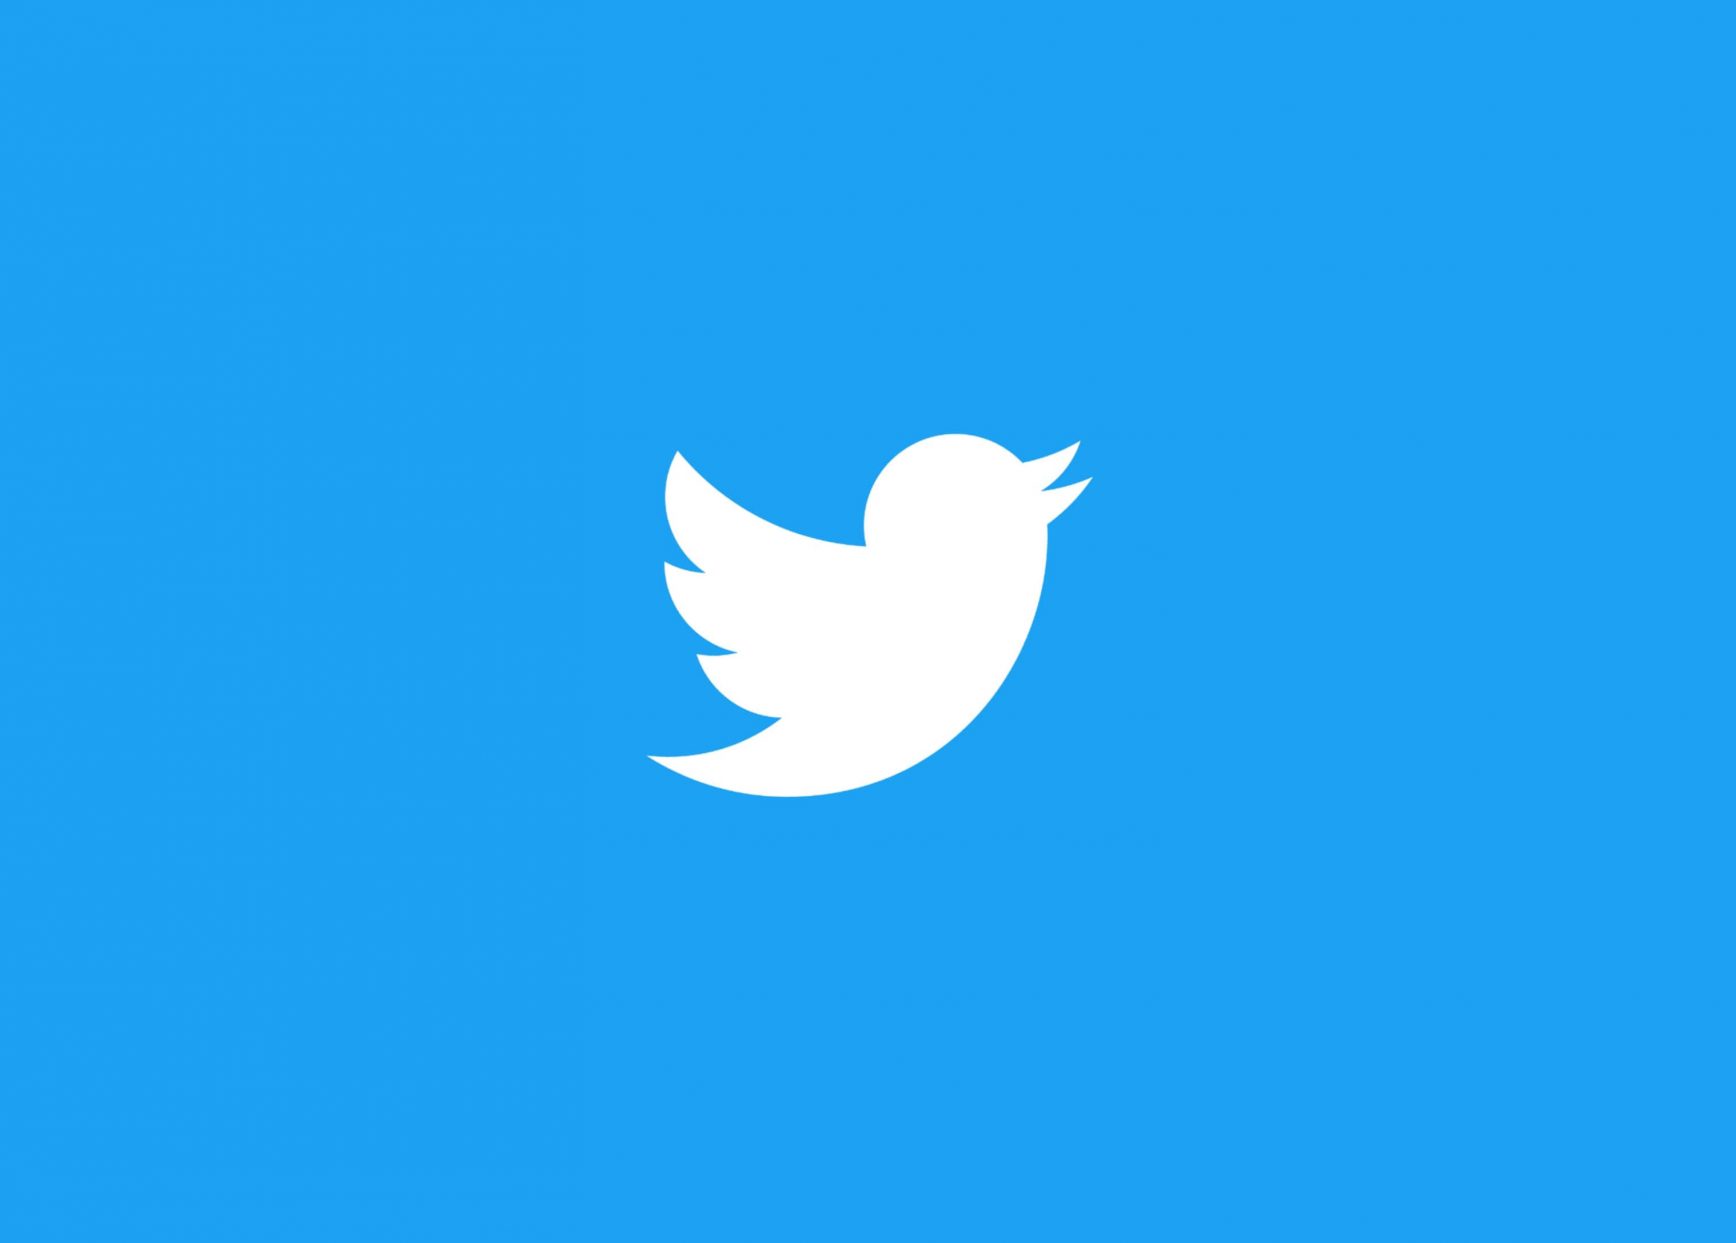 How to Download Twitter Videos - [APRIL 2021]